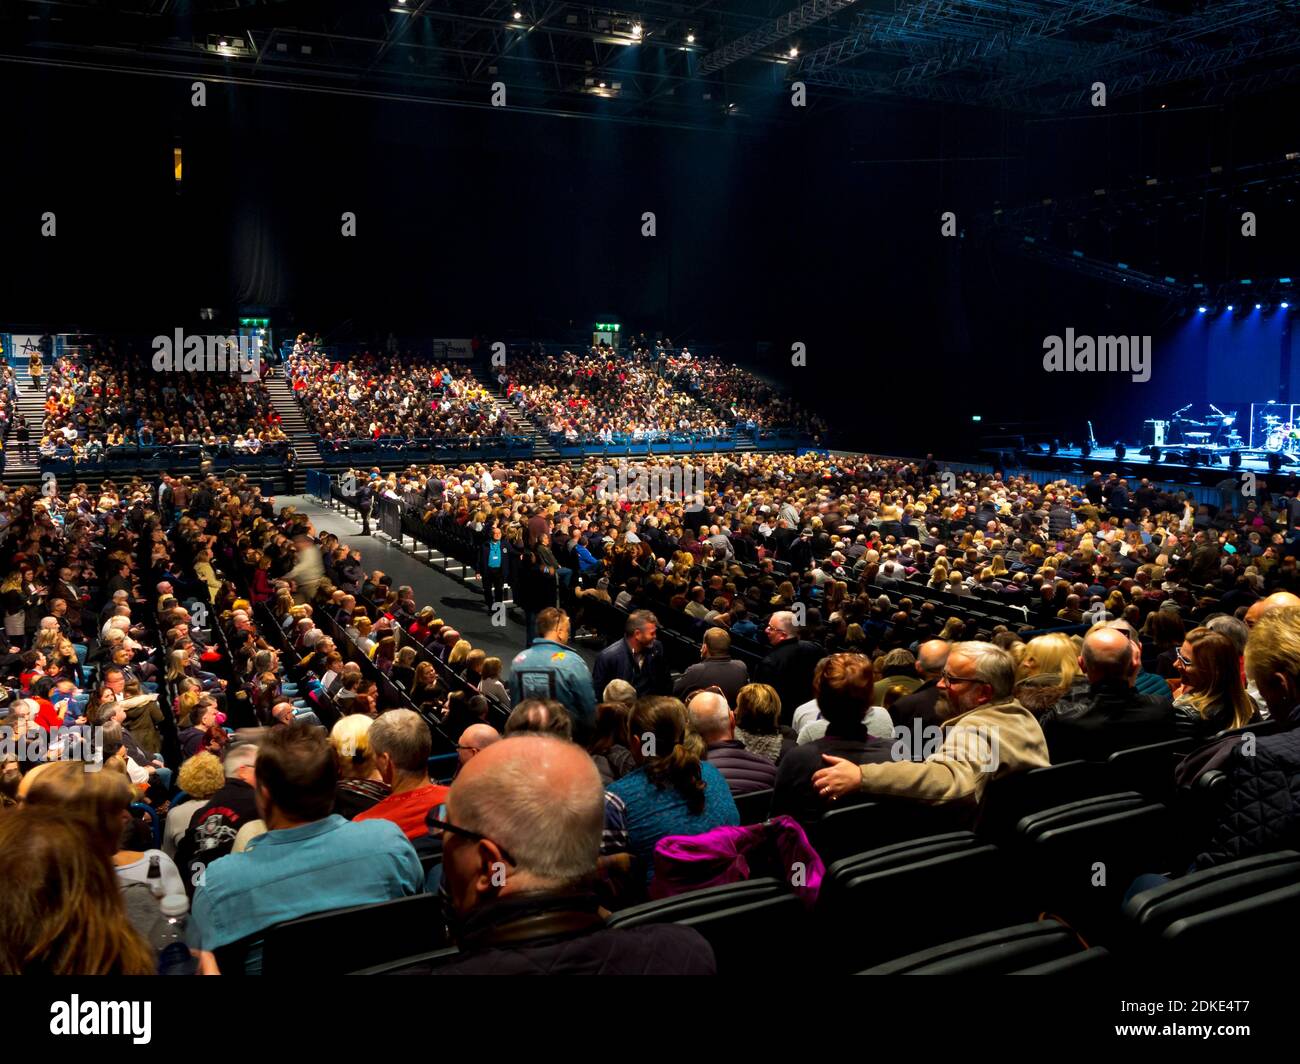 Audience inside the Birmingham Arena West Midlands England UK which was renamed the Utilita Arena in 2020 and is an indoor entertainment venue. Stock Photo